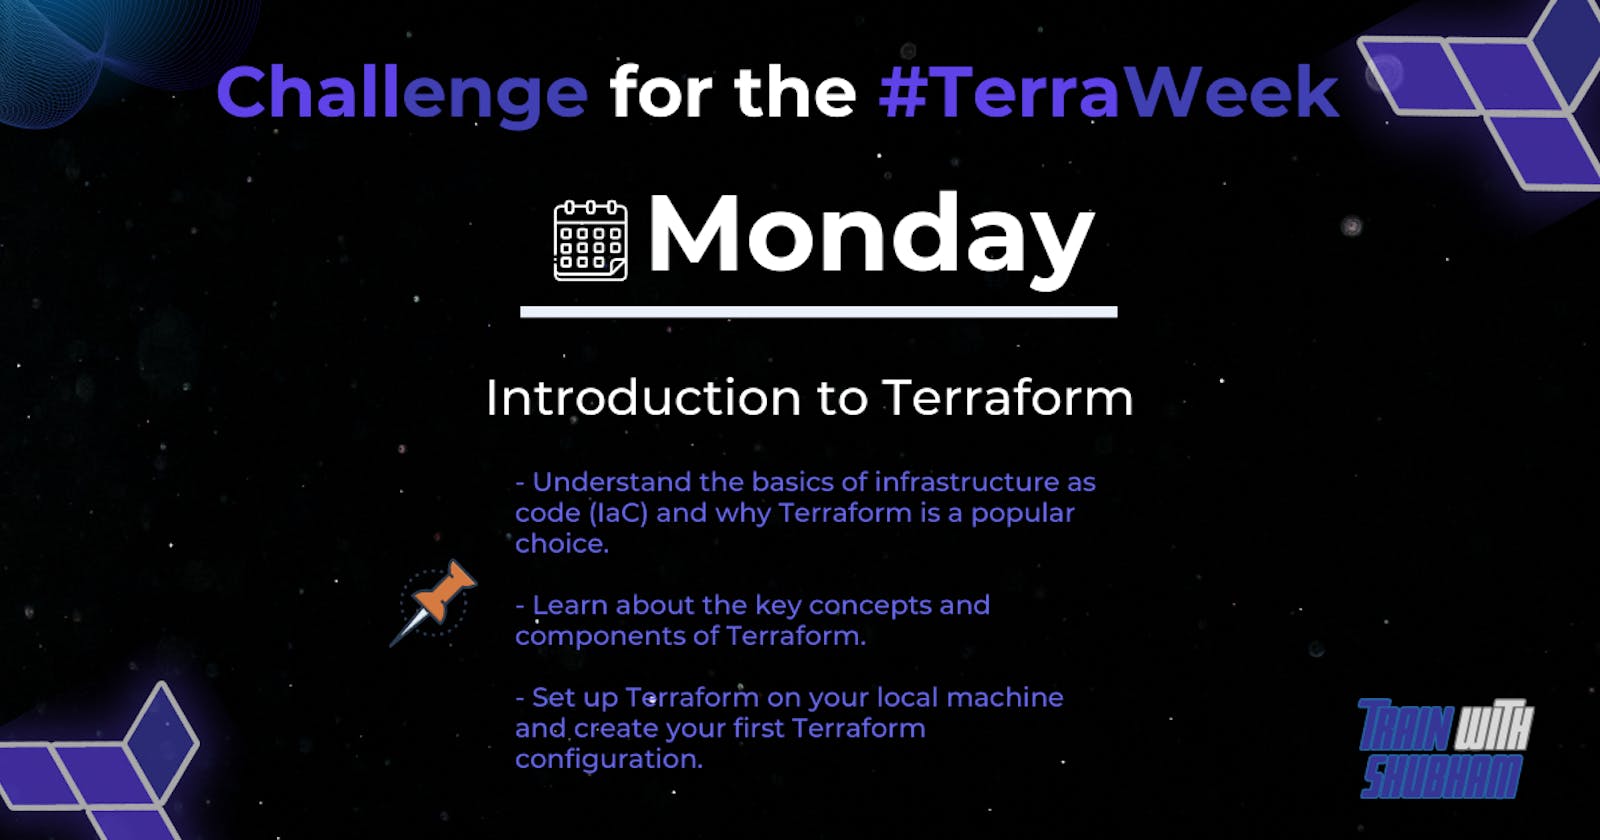 Day 1: Introduction to Terraform